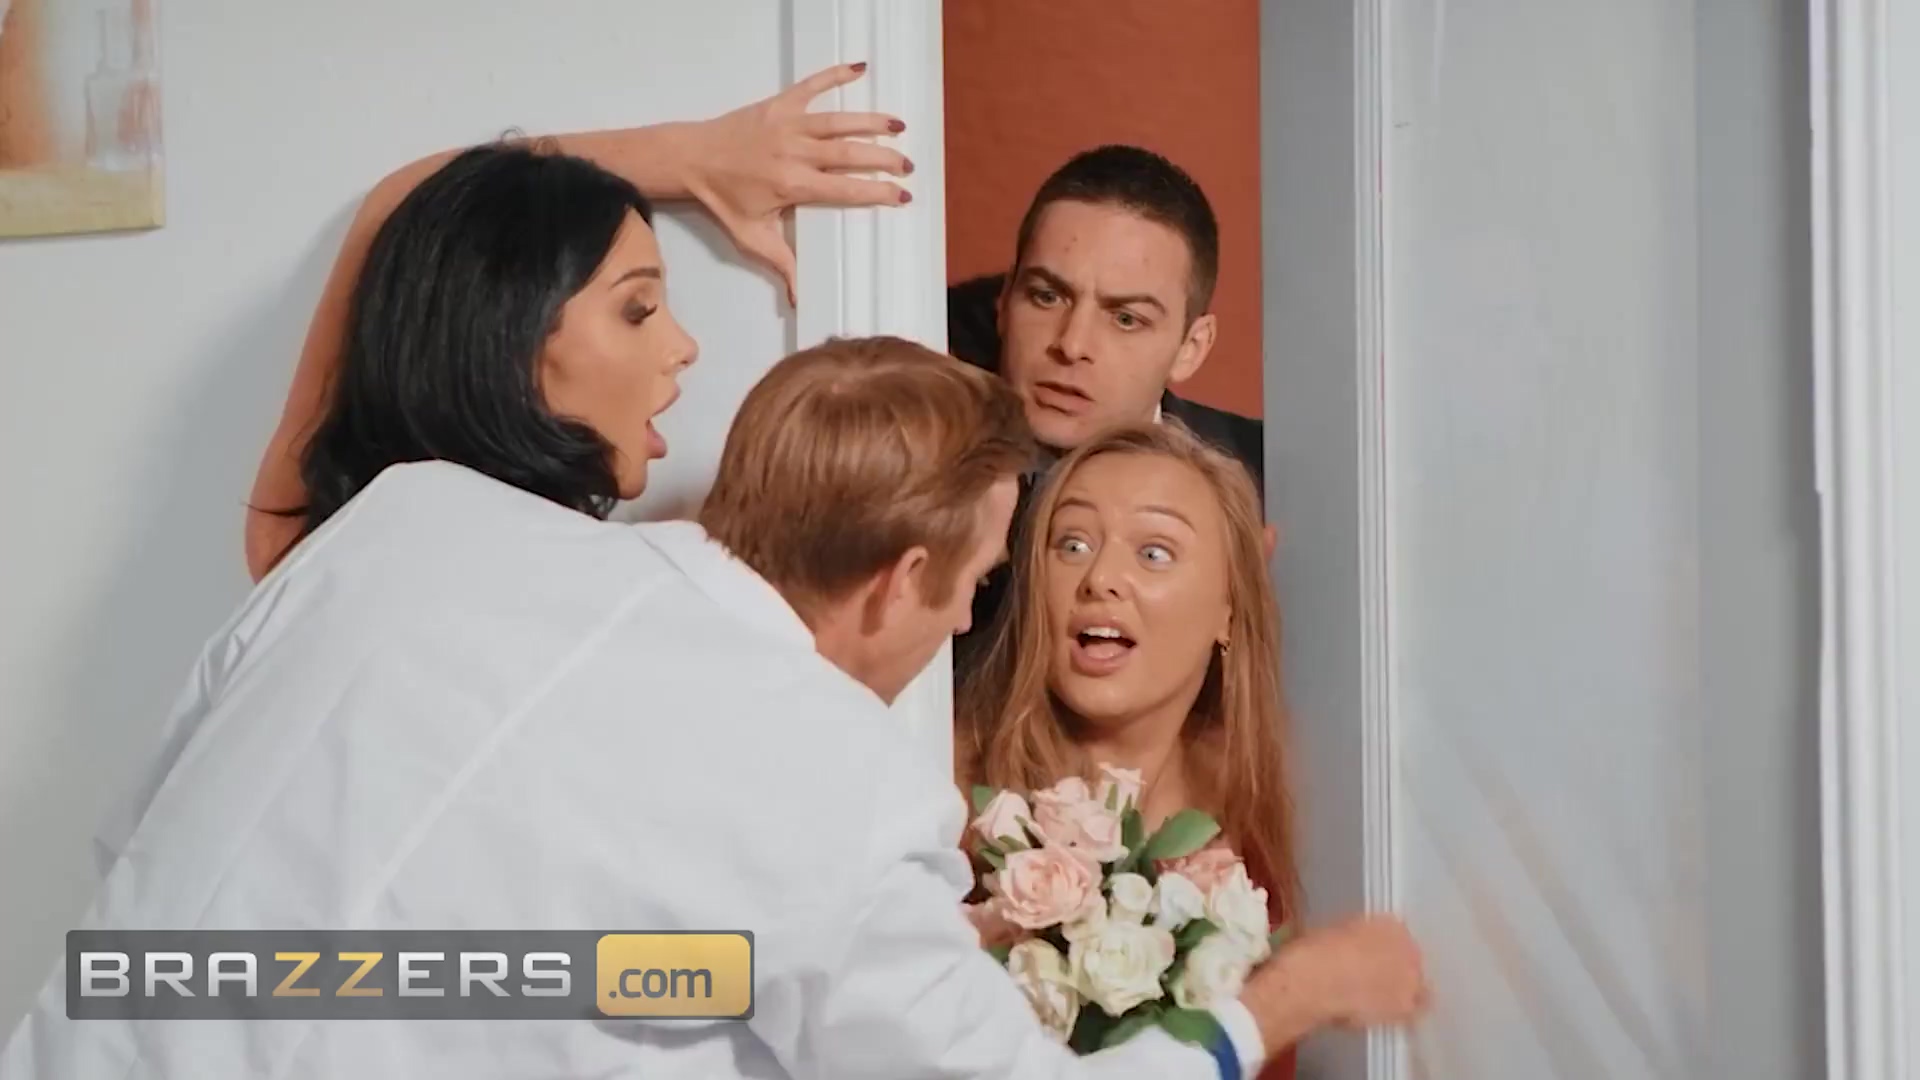 Brazzer Guest Fuck Porn Video - Busty bride cheating on groom with doctor before wedding!